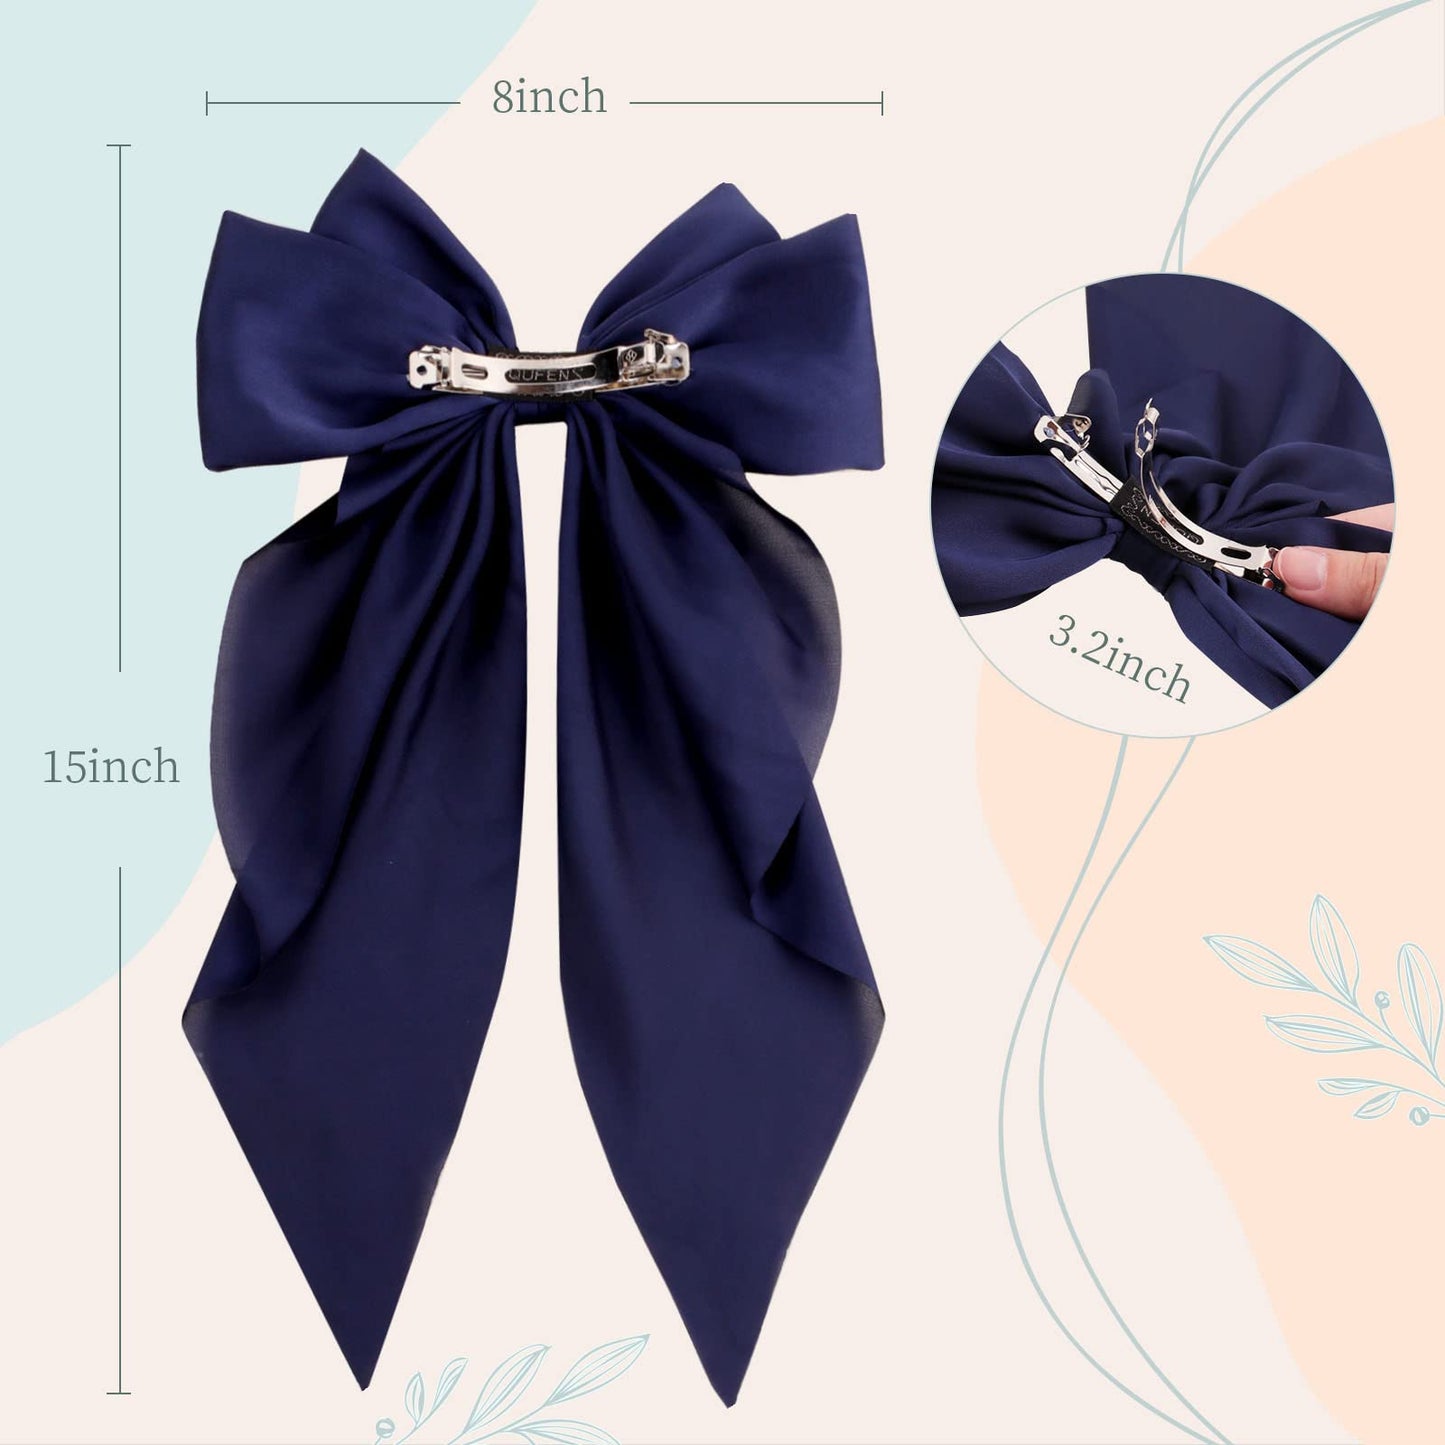 8Pcs Big Satin Layered Hair Bows for Women Girls 8 Inch Barrette Hair Clip Long Black Ribbon Bows French Style Hair Accessories (Big bow style)